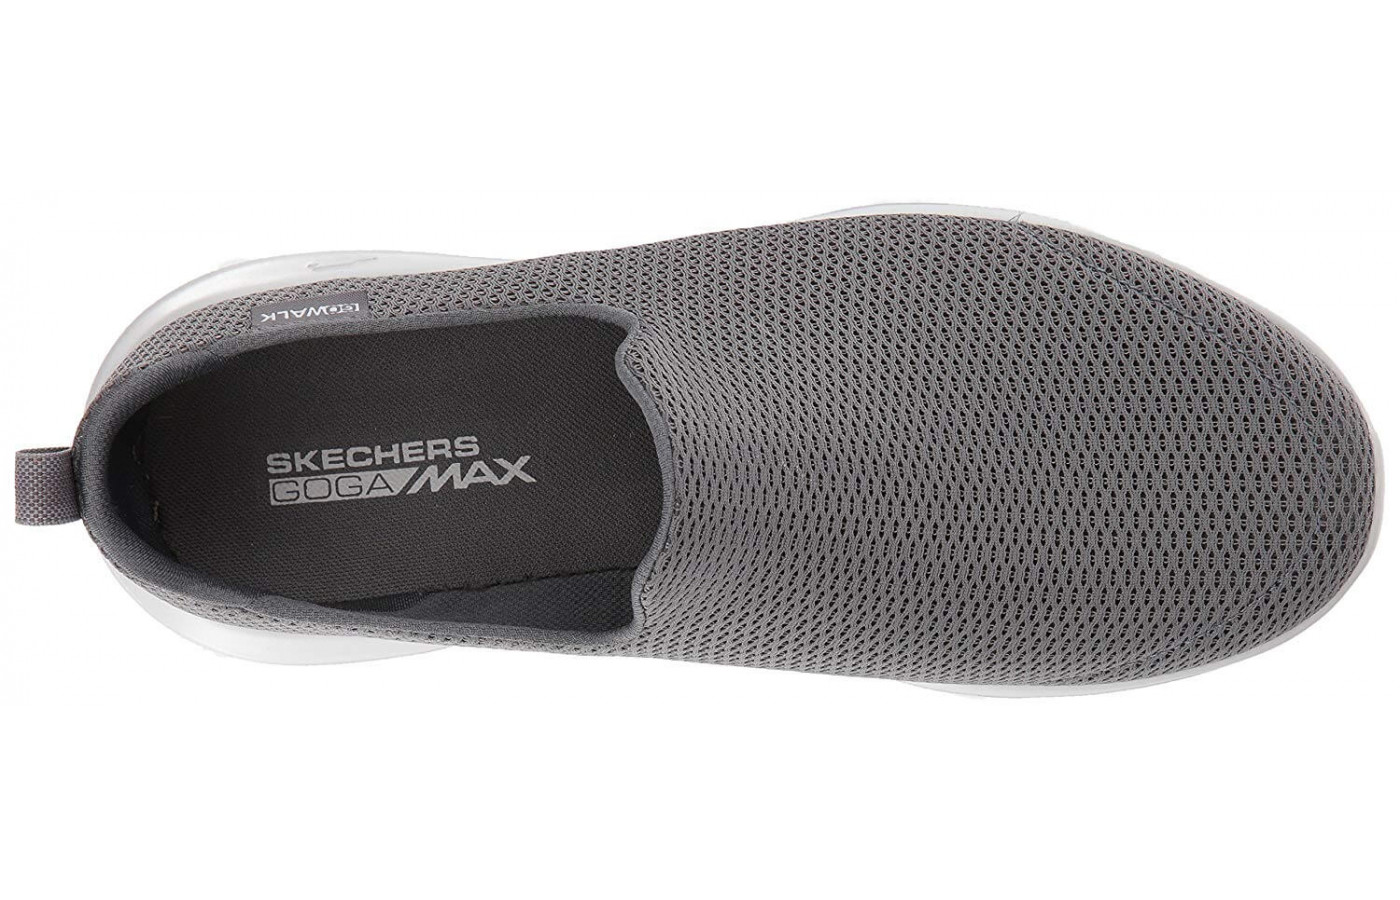 The GoMax Walk has a slip-on construction and is made of textured mesh.